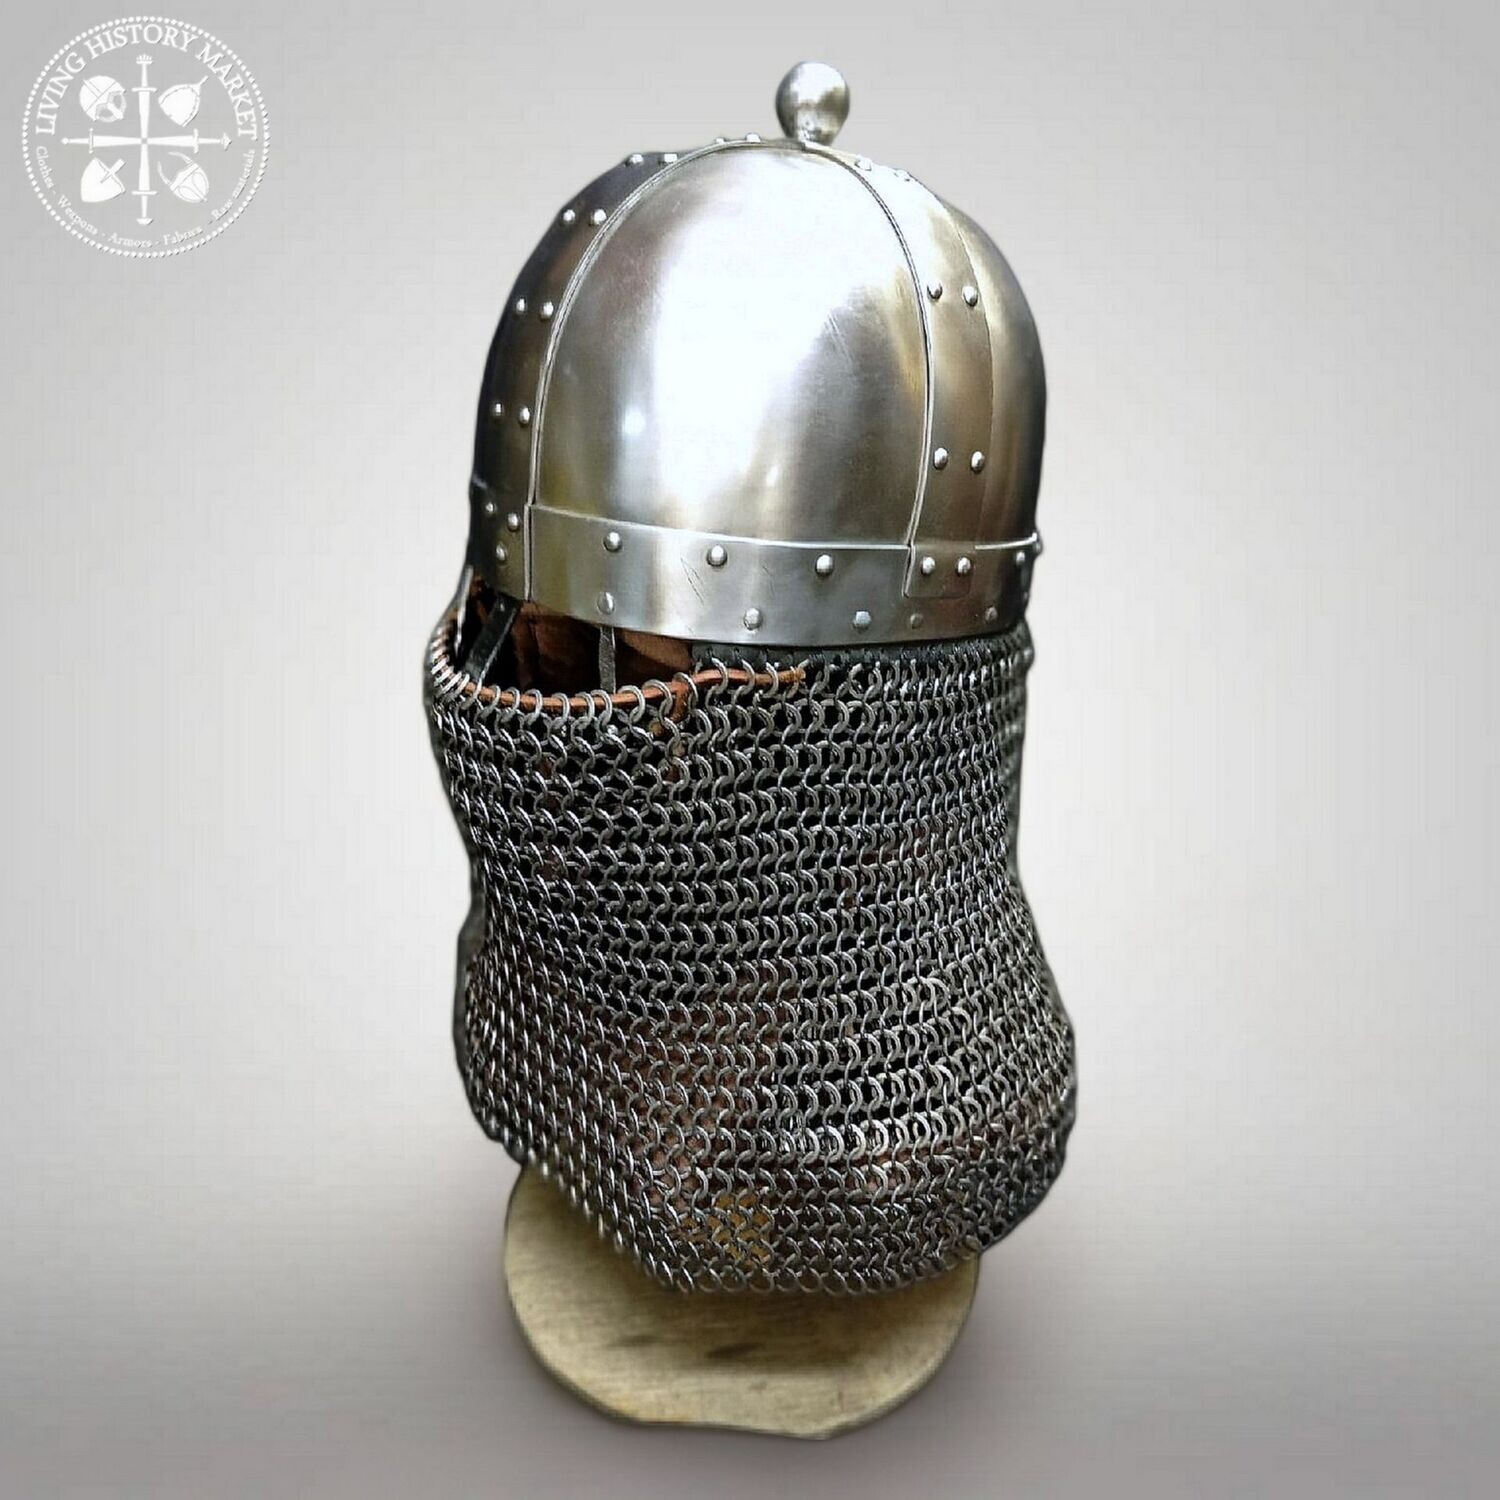 Carolingian spangenhelm helmet - Special full contact version - 8-10th century (full chainmail aventail & hidden protections included)